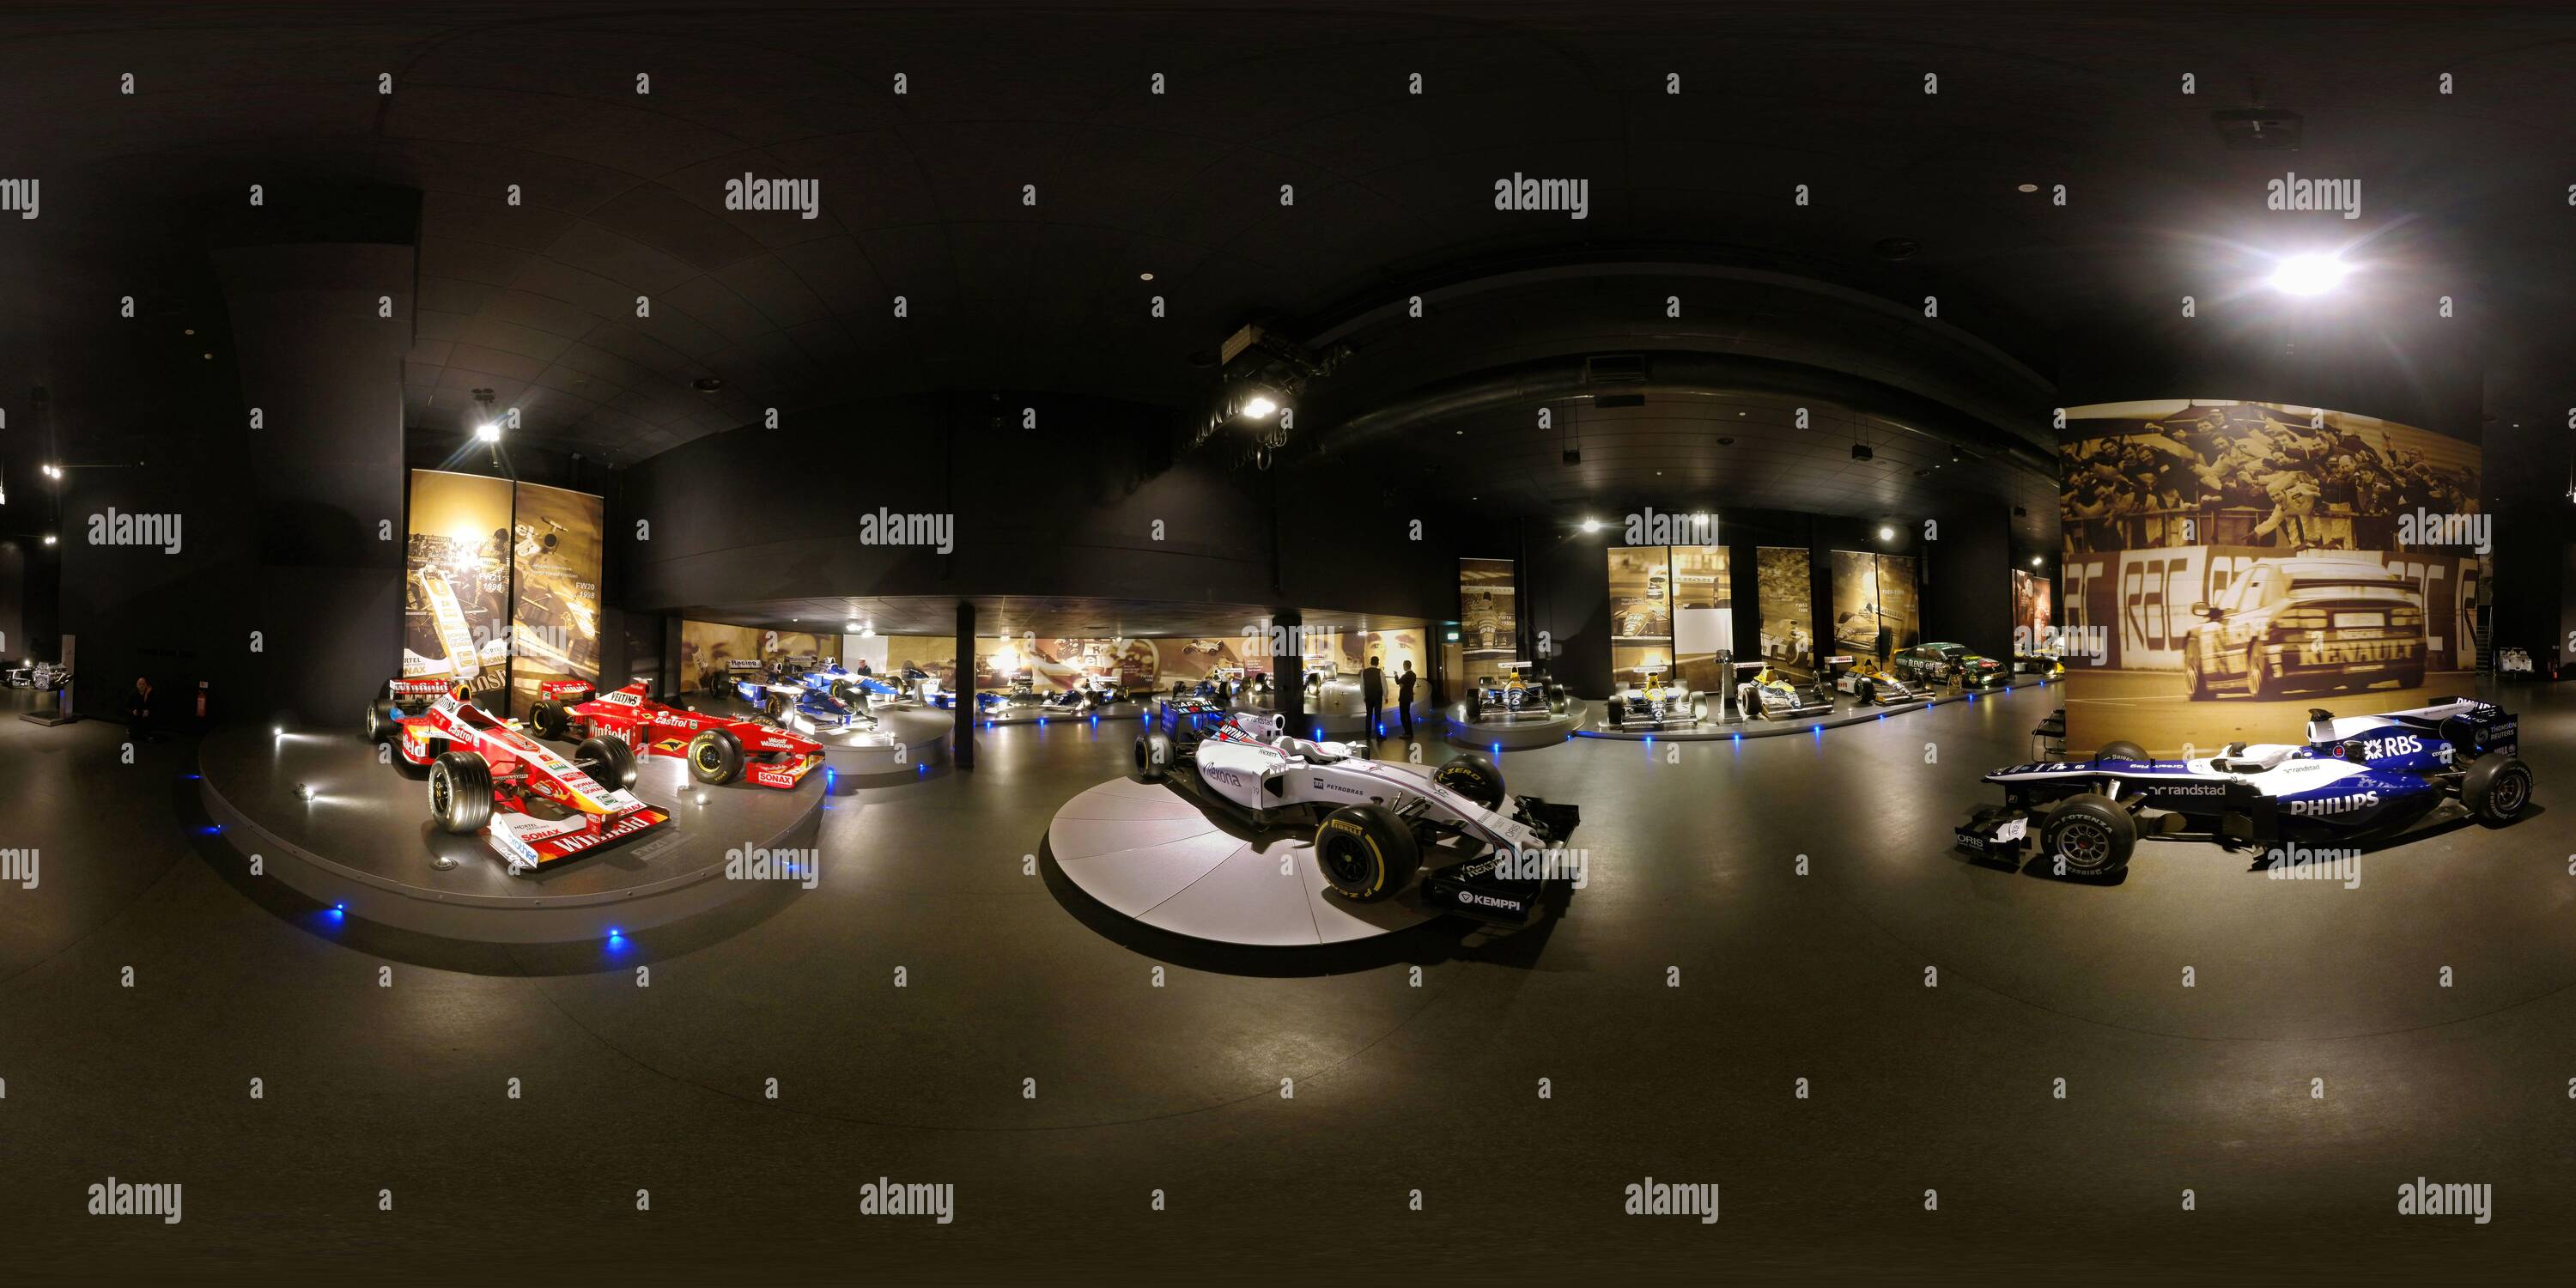 360 degree panoramic view of The Williams F1 Heritage Museum at the Formula 1 team’s heaquarters in Grove. Copyright Picture : © MARK PAIN / ALAMY